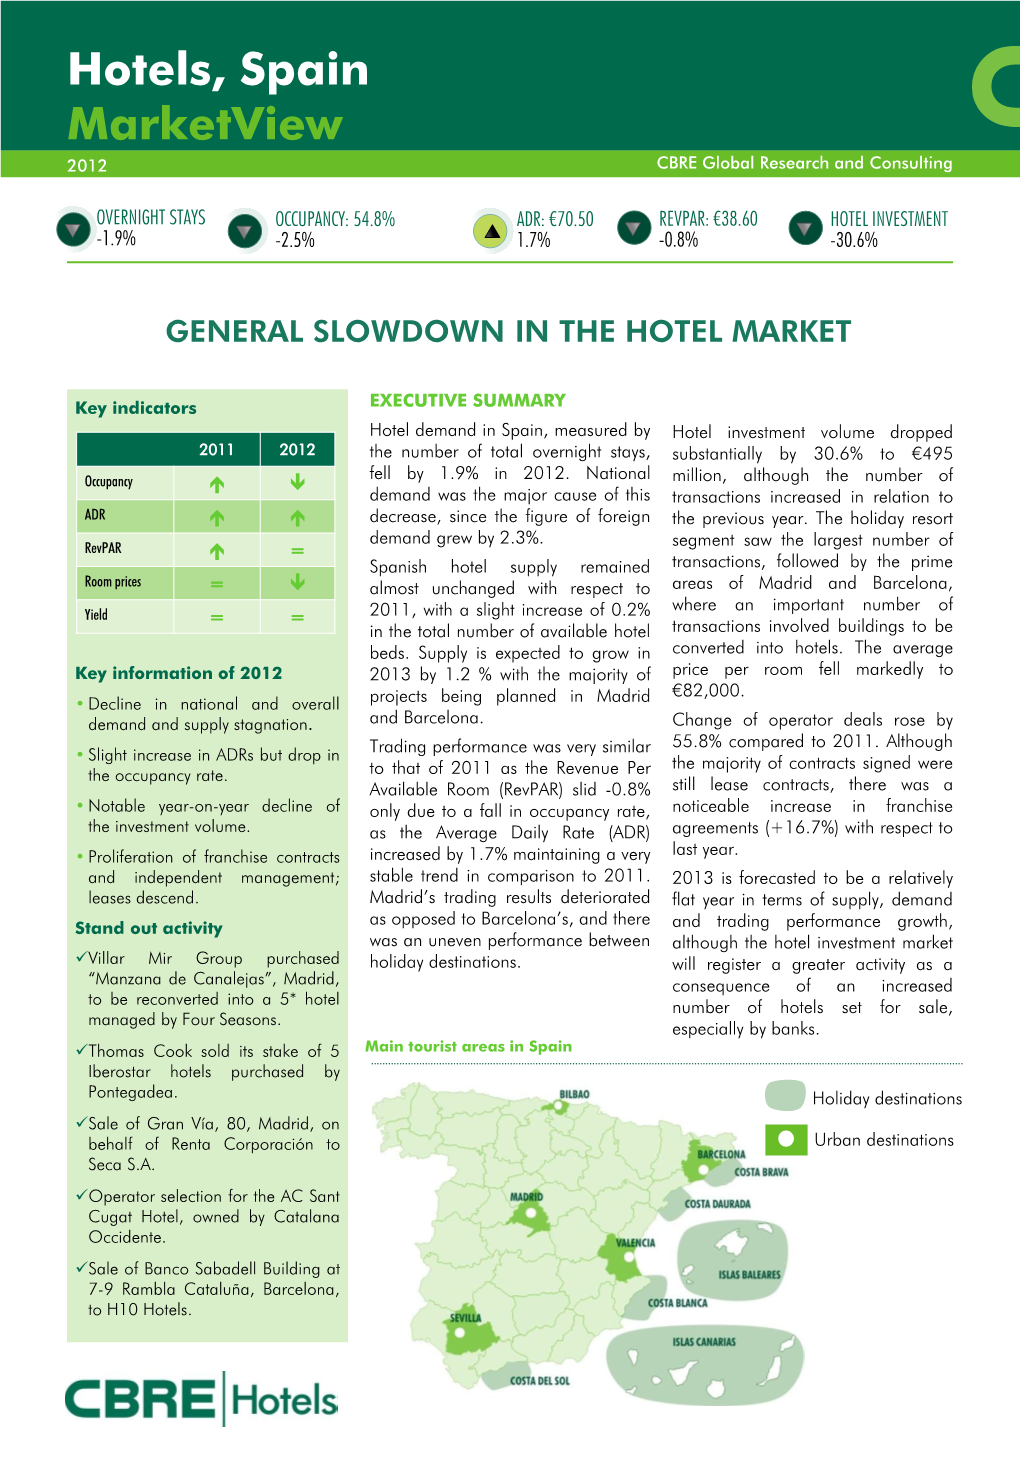 Hotels, Spain Marketview 2012 CBRE Global Research and Consulting